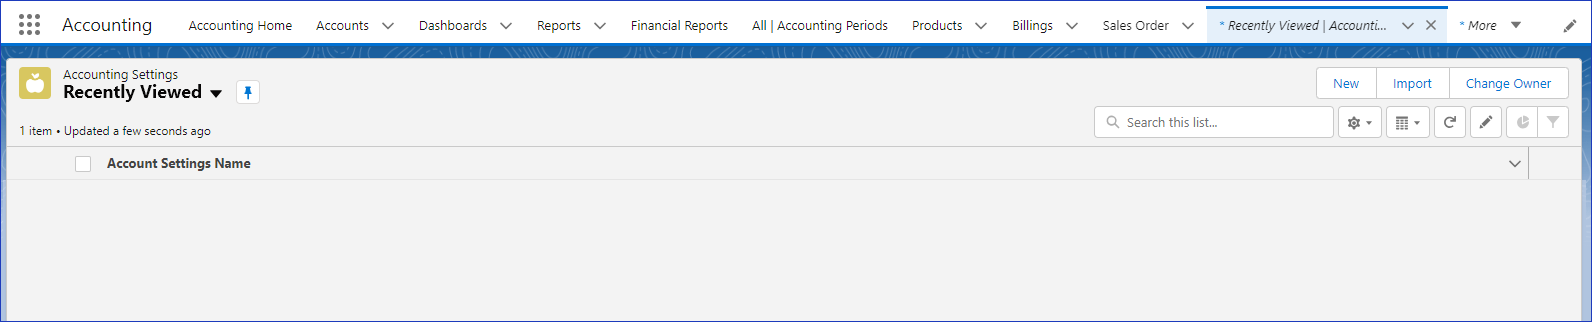 Accounting Settings_01.png